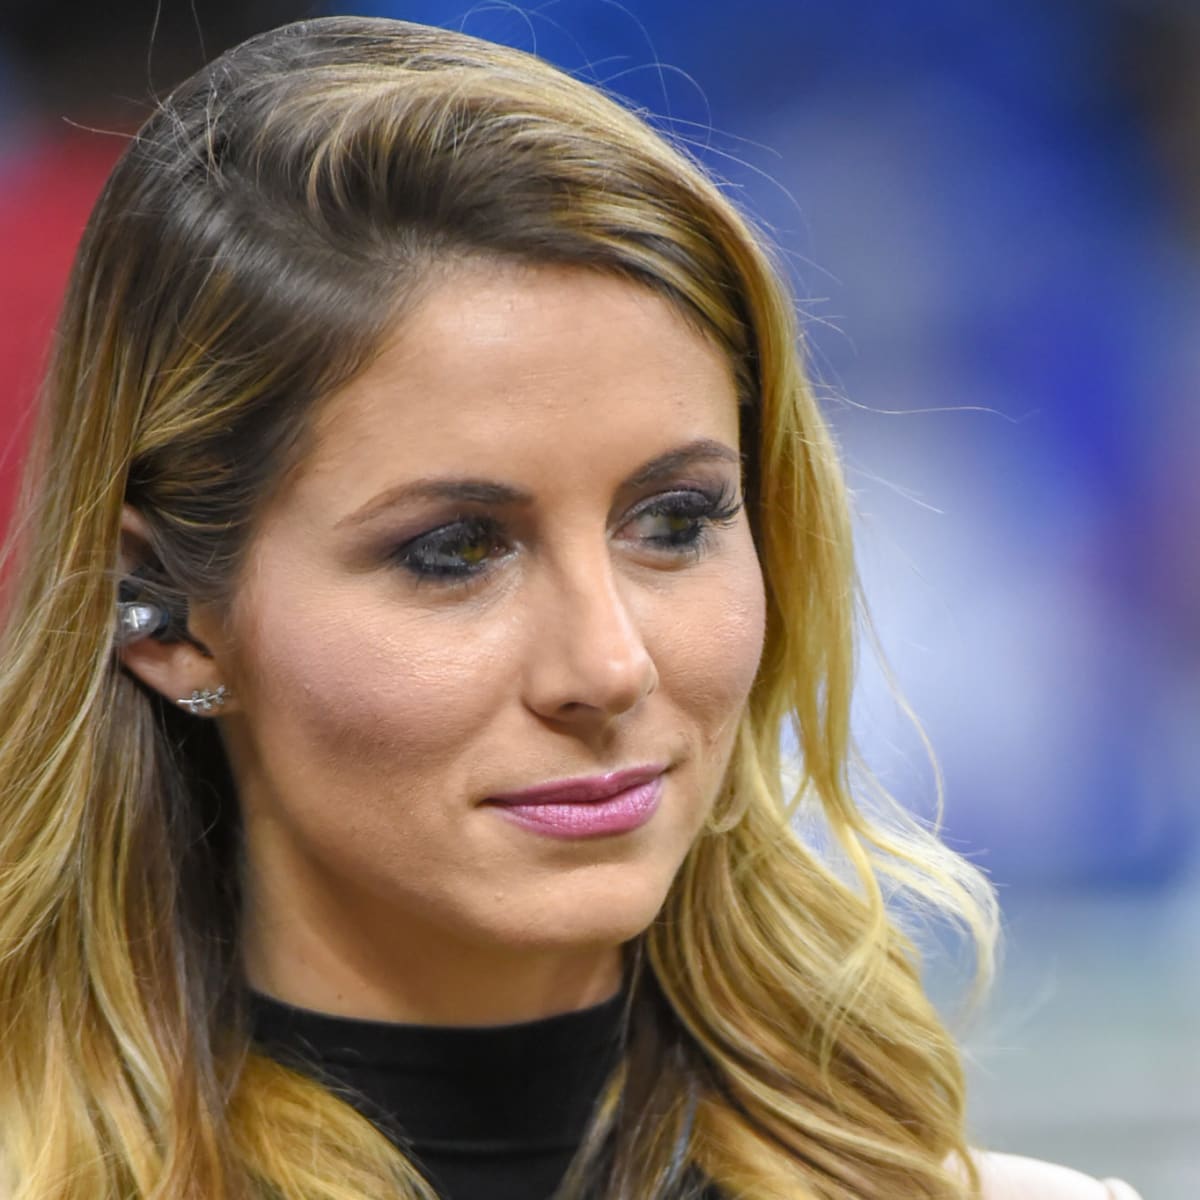 Look NFL World Reacts To Viral Laura Rutledge Video